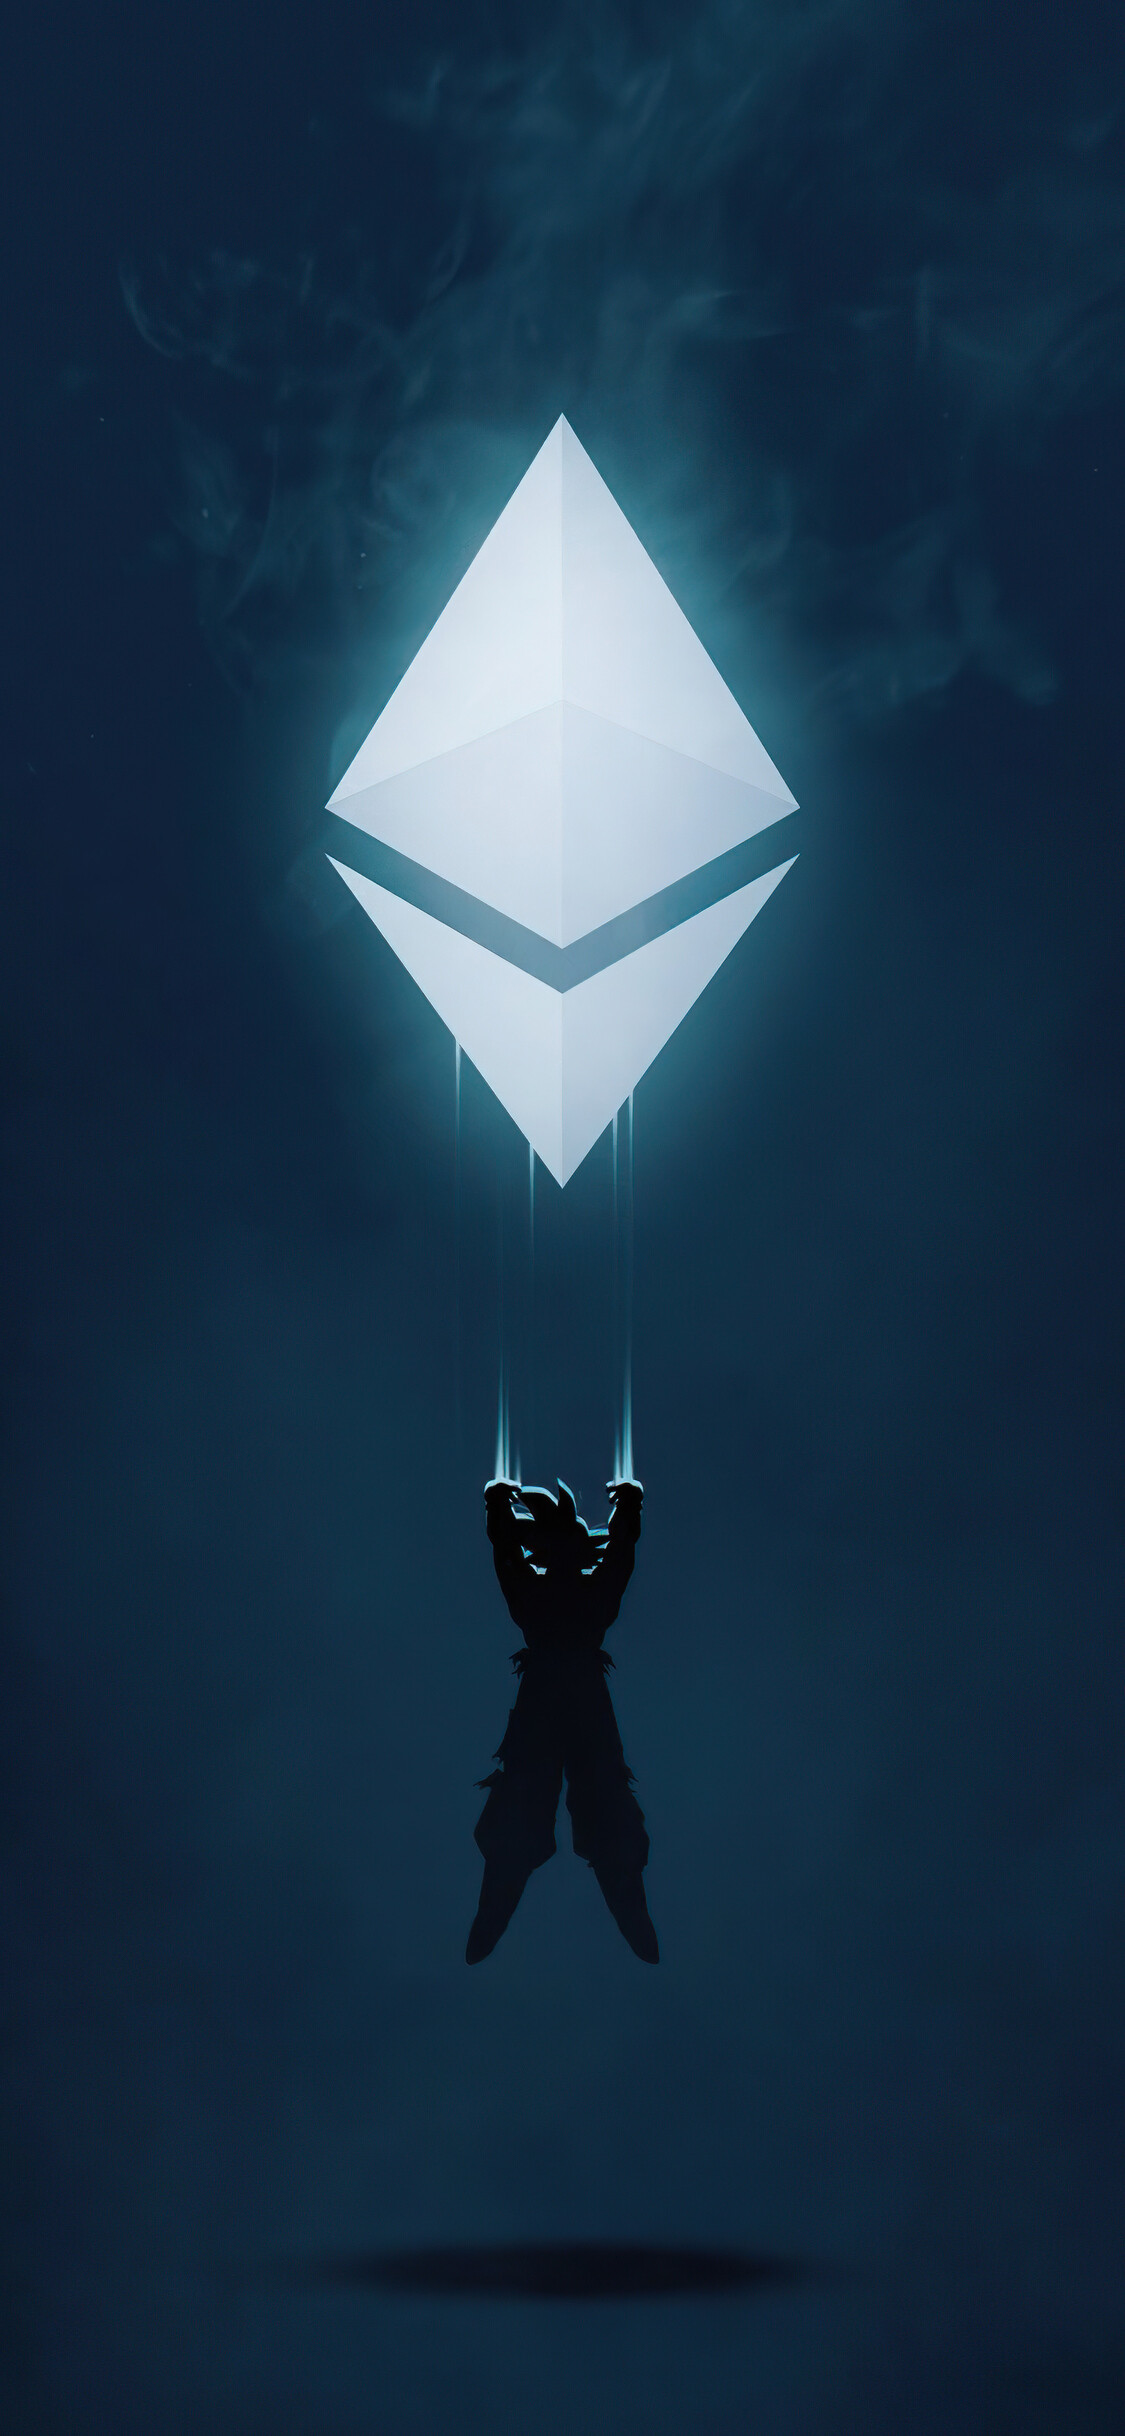 Cryptocurrency: ETH, A blockchain platform created to support smart contracts and secure financial transactions. 1130x2440 HD Background.